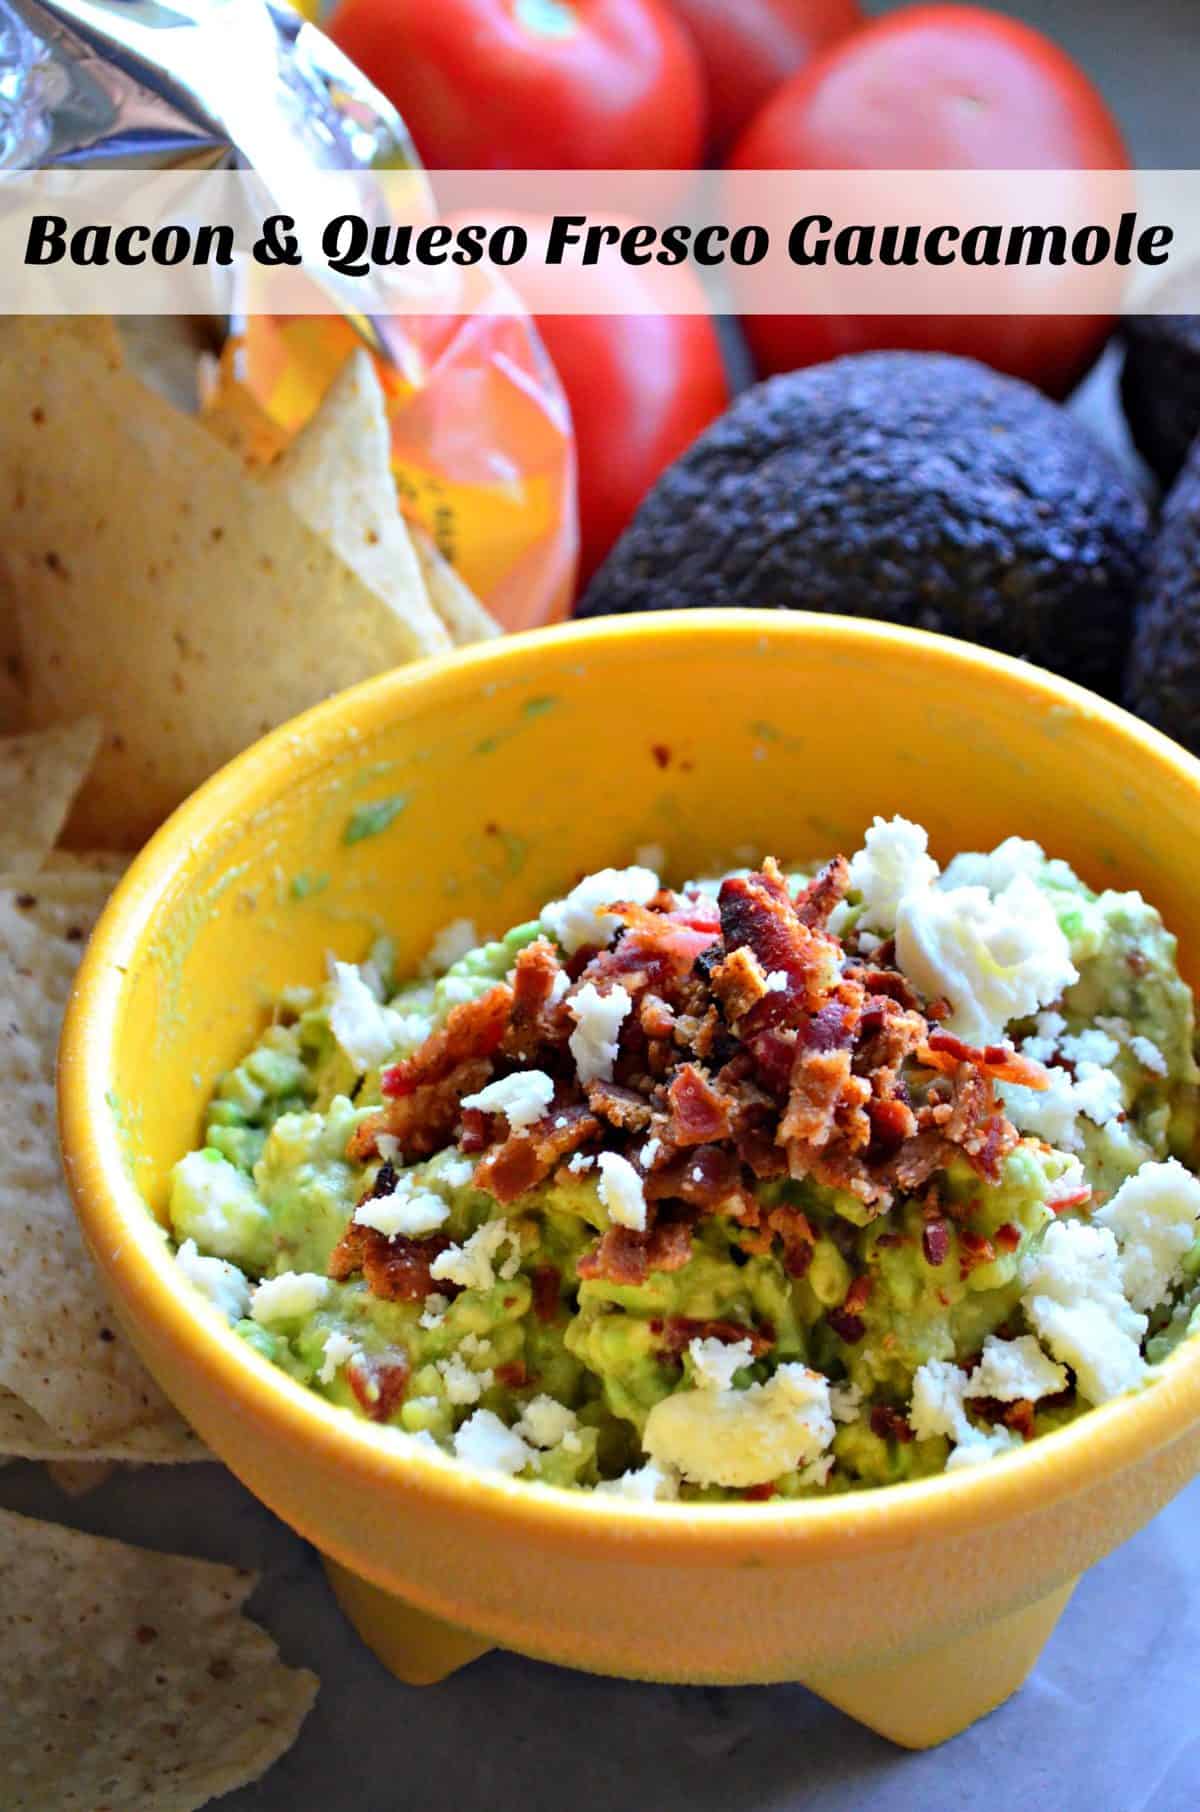 small yellow bowl of guacamole topped with queso fresco and bacon bits with title text.